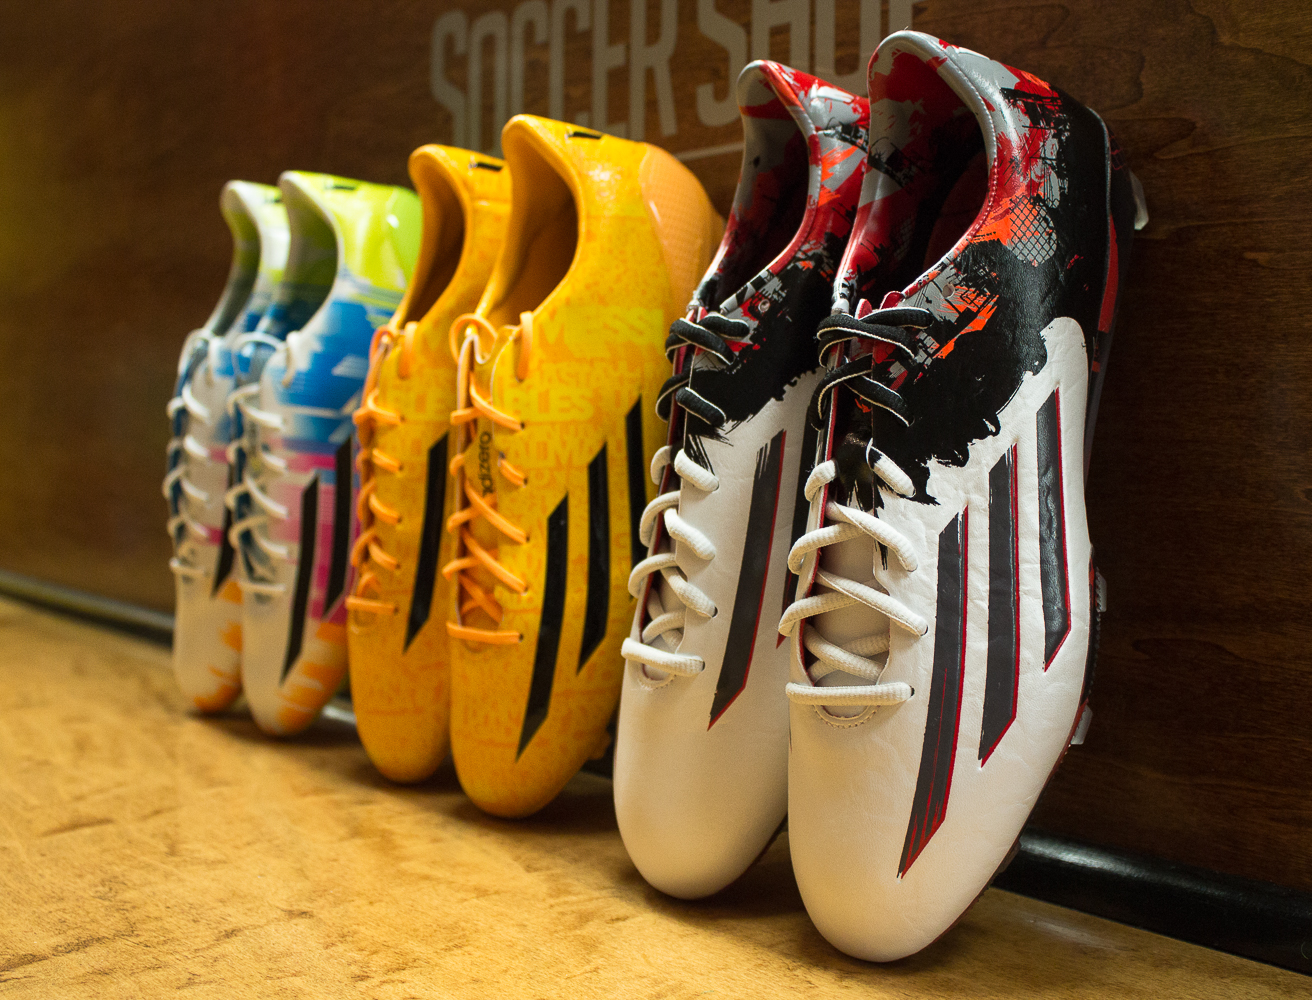 Urban and Polished: Leo Messi & Adidas The Pibe Barr10 Boot Soccer City Sports Center